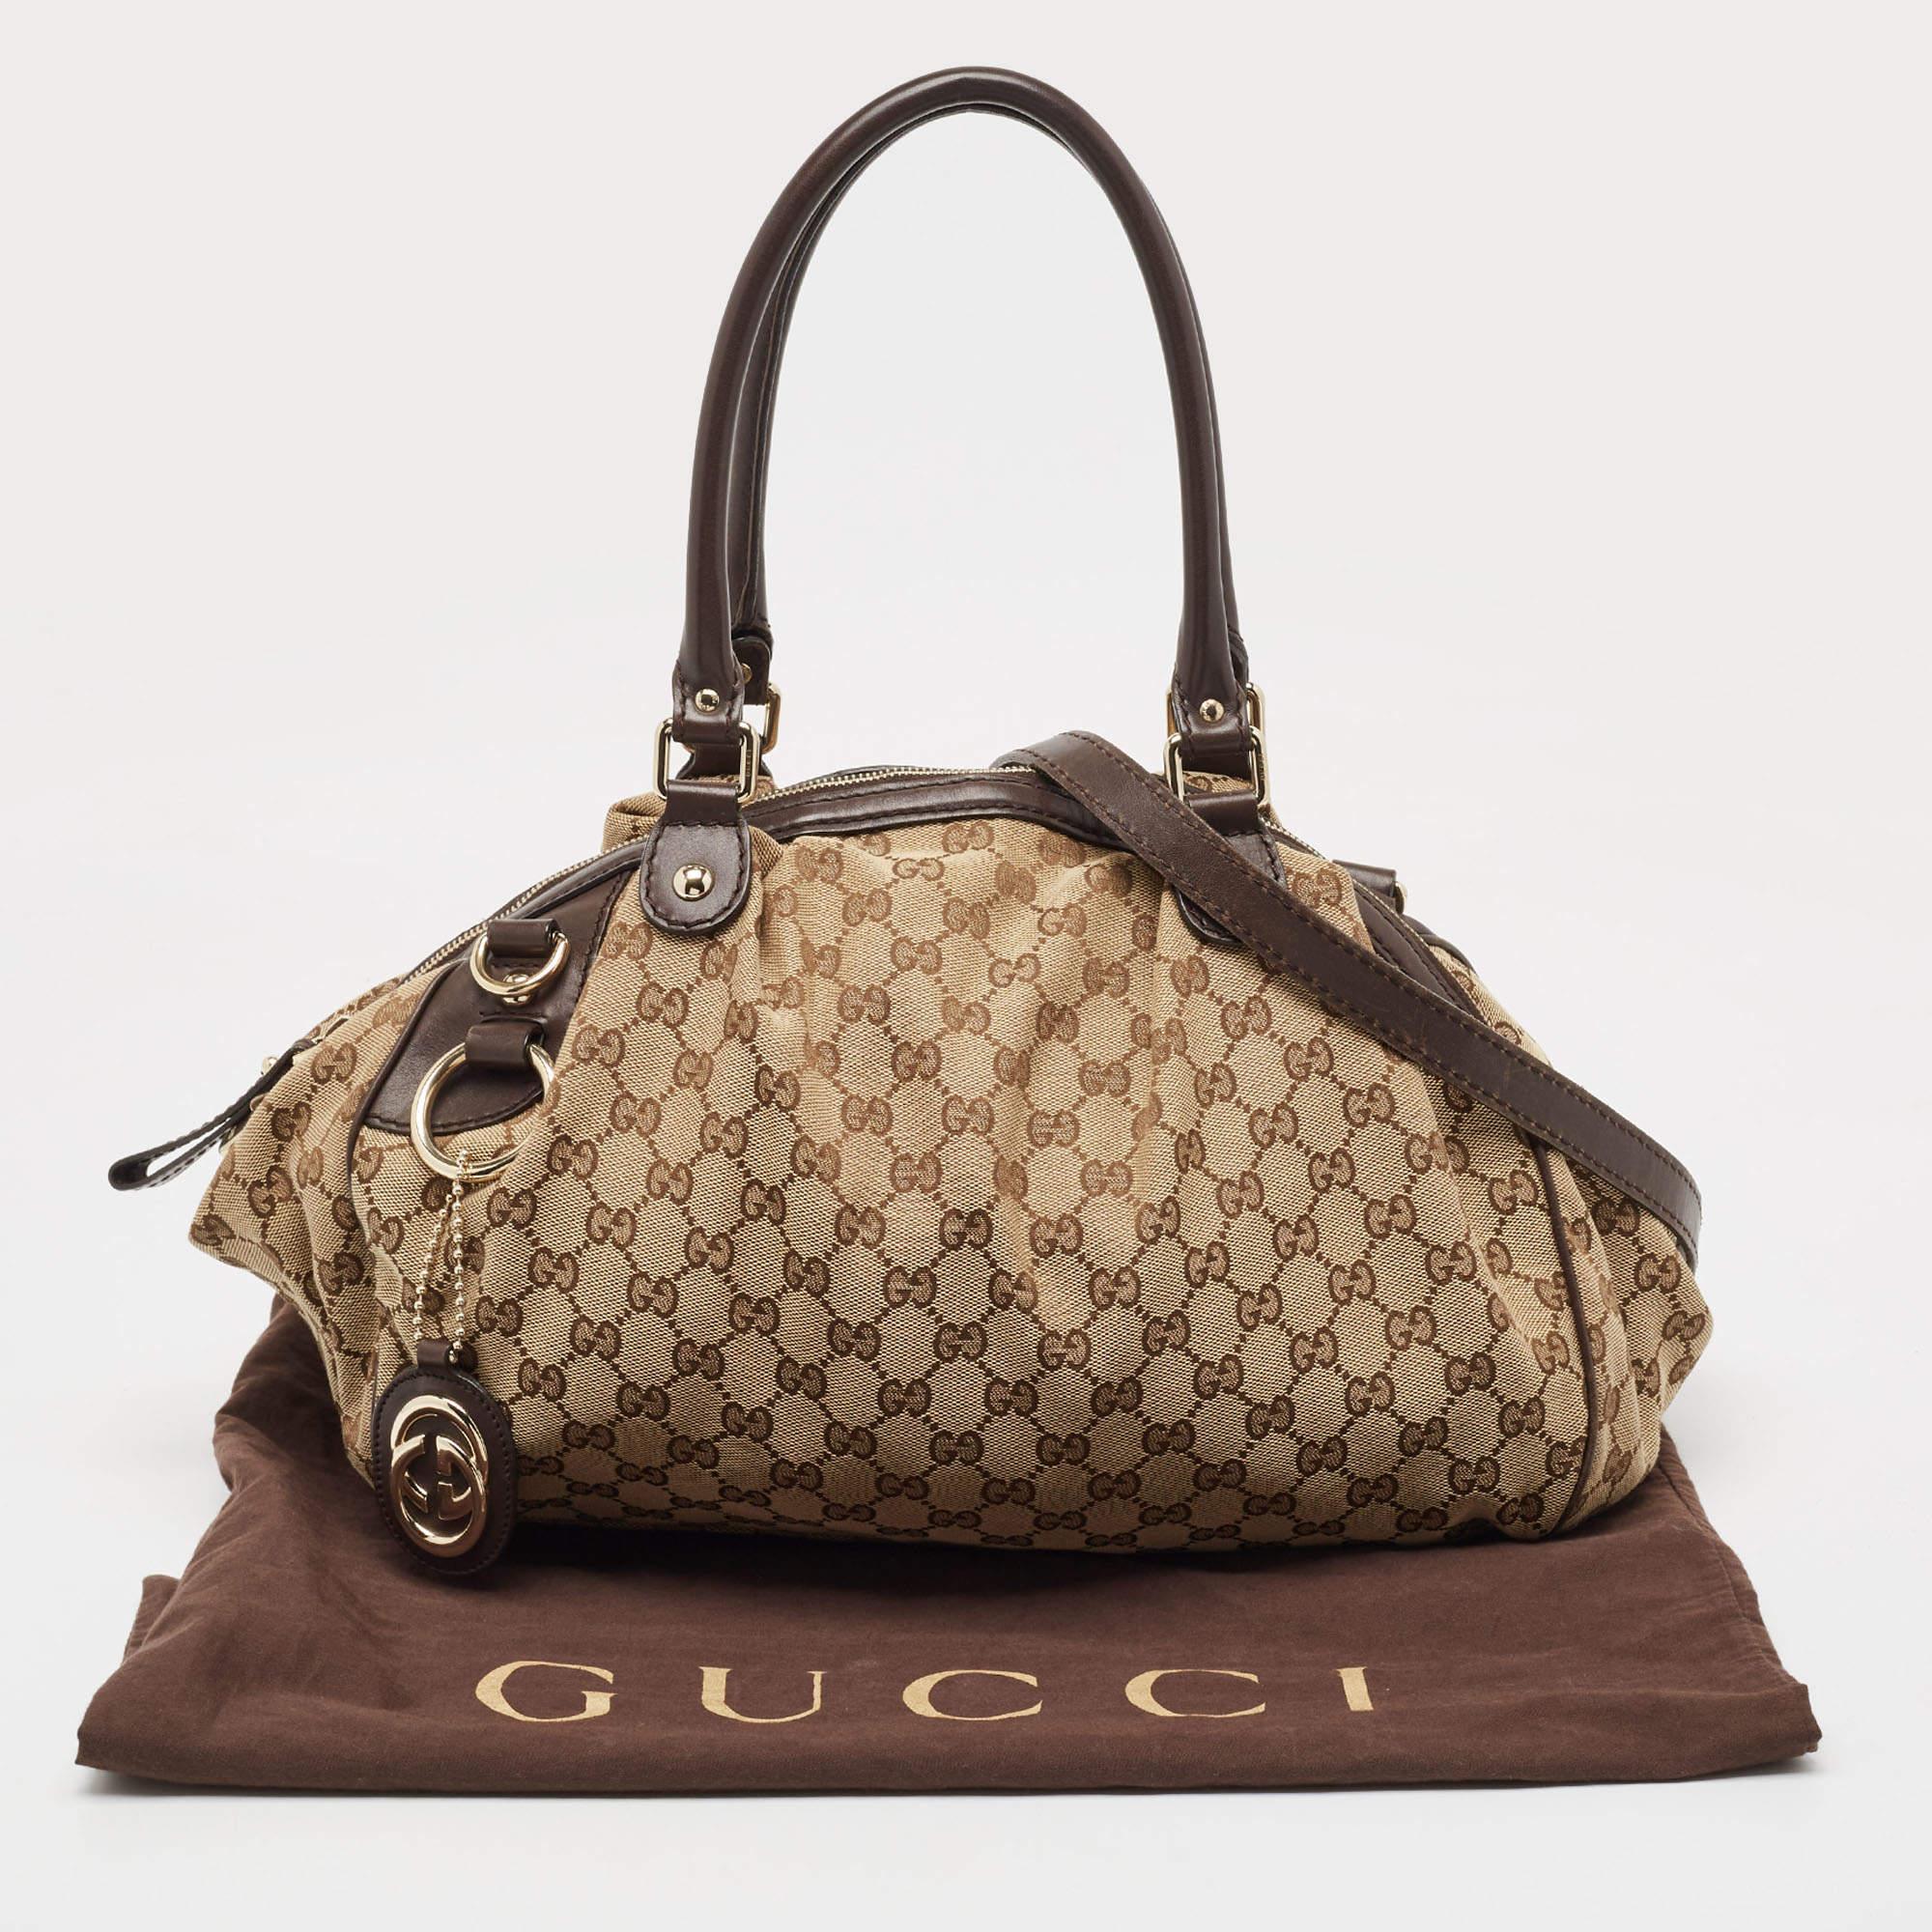 Gucci Brown/Beige GG Canvas and Leather Sukey Boston Bag 14